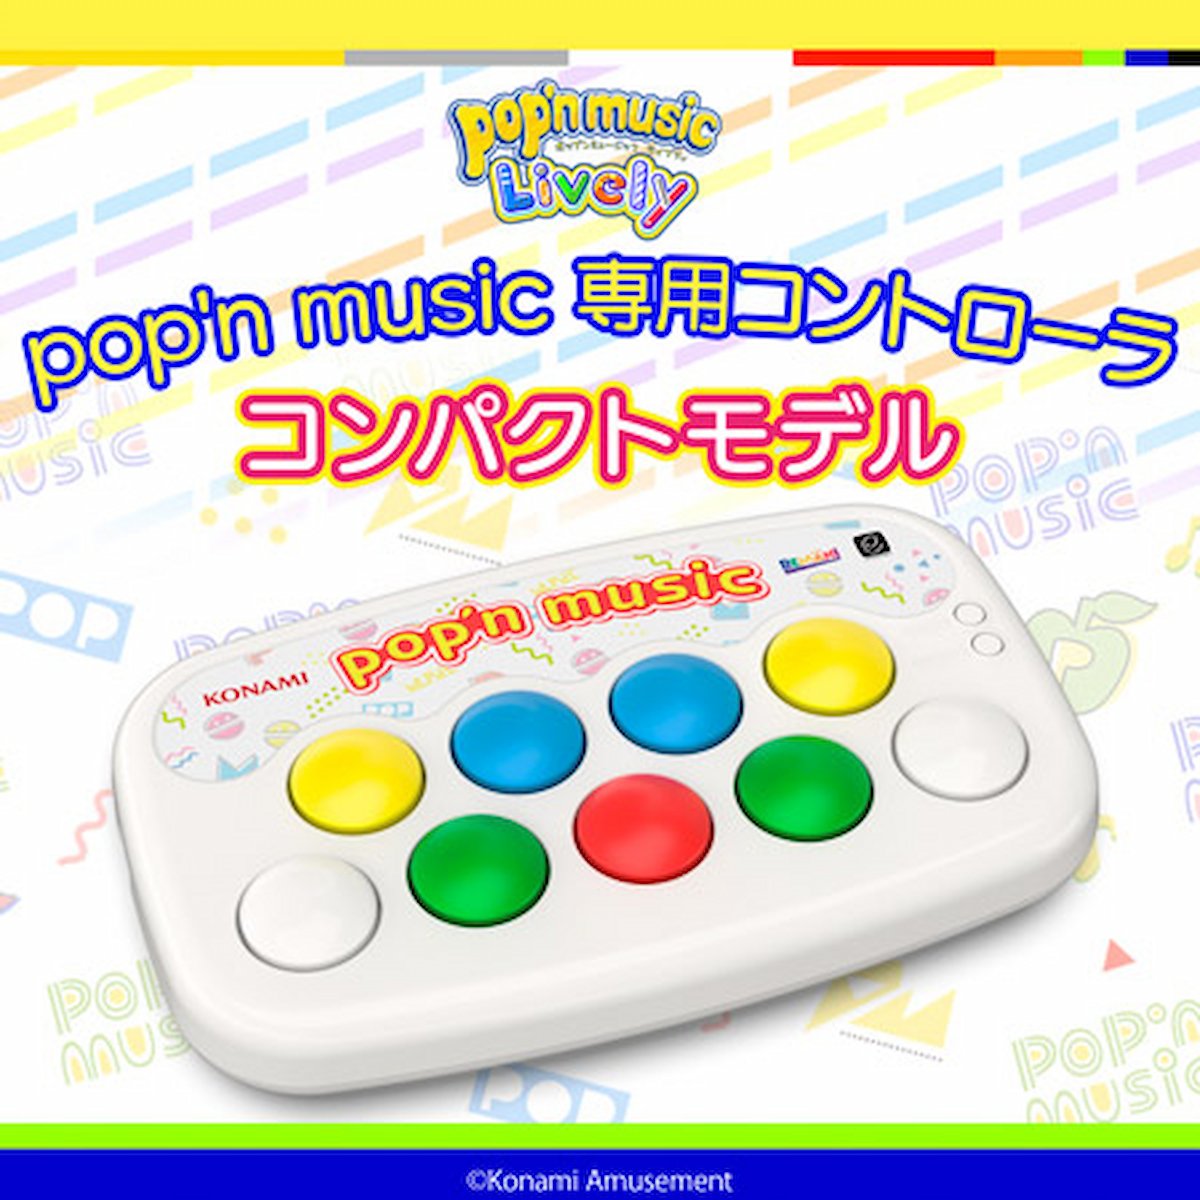 pop'n music 専用コントローラ コンパクトモデル